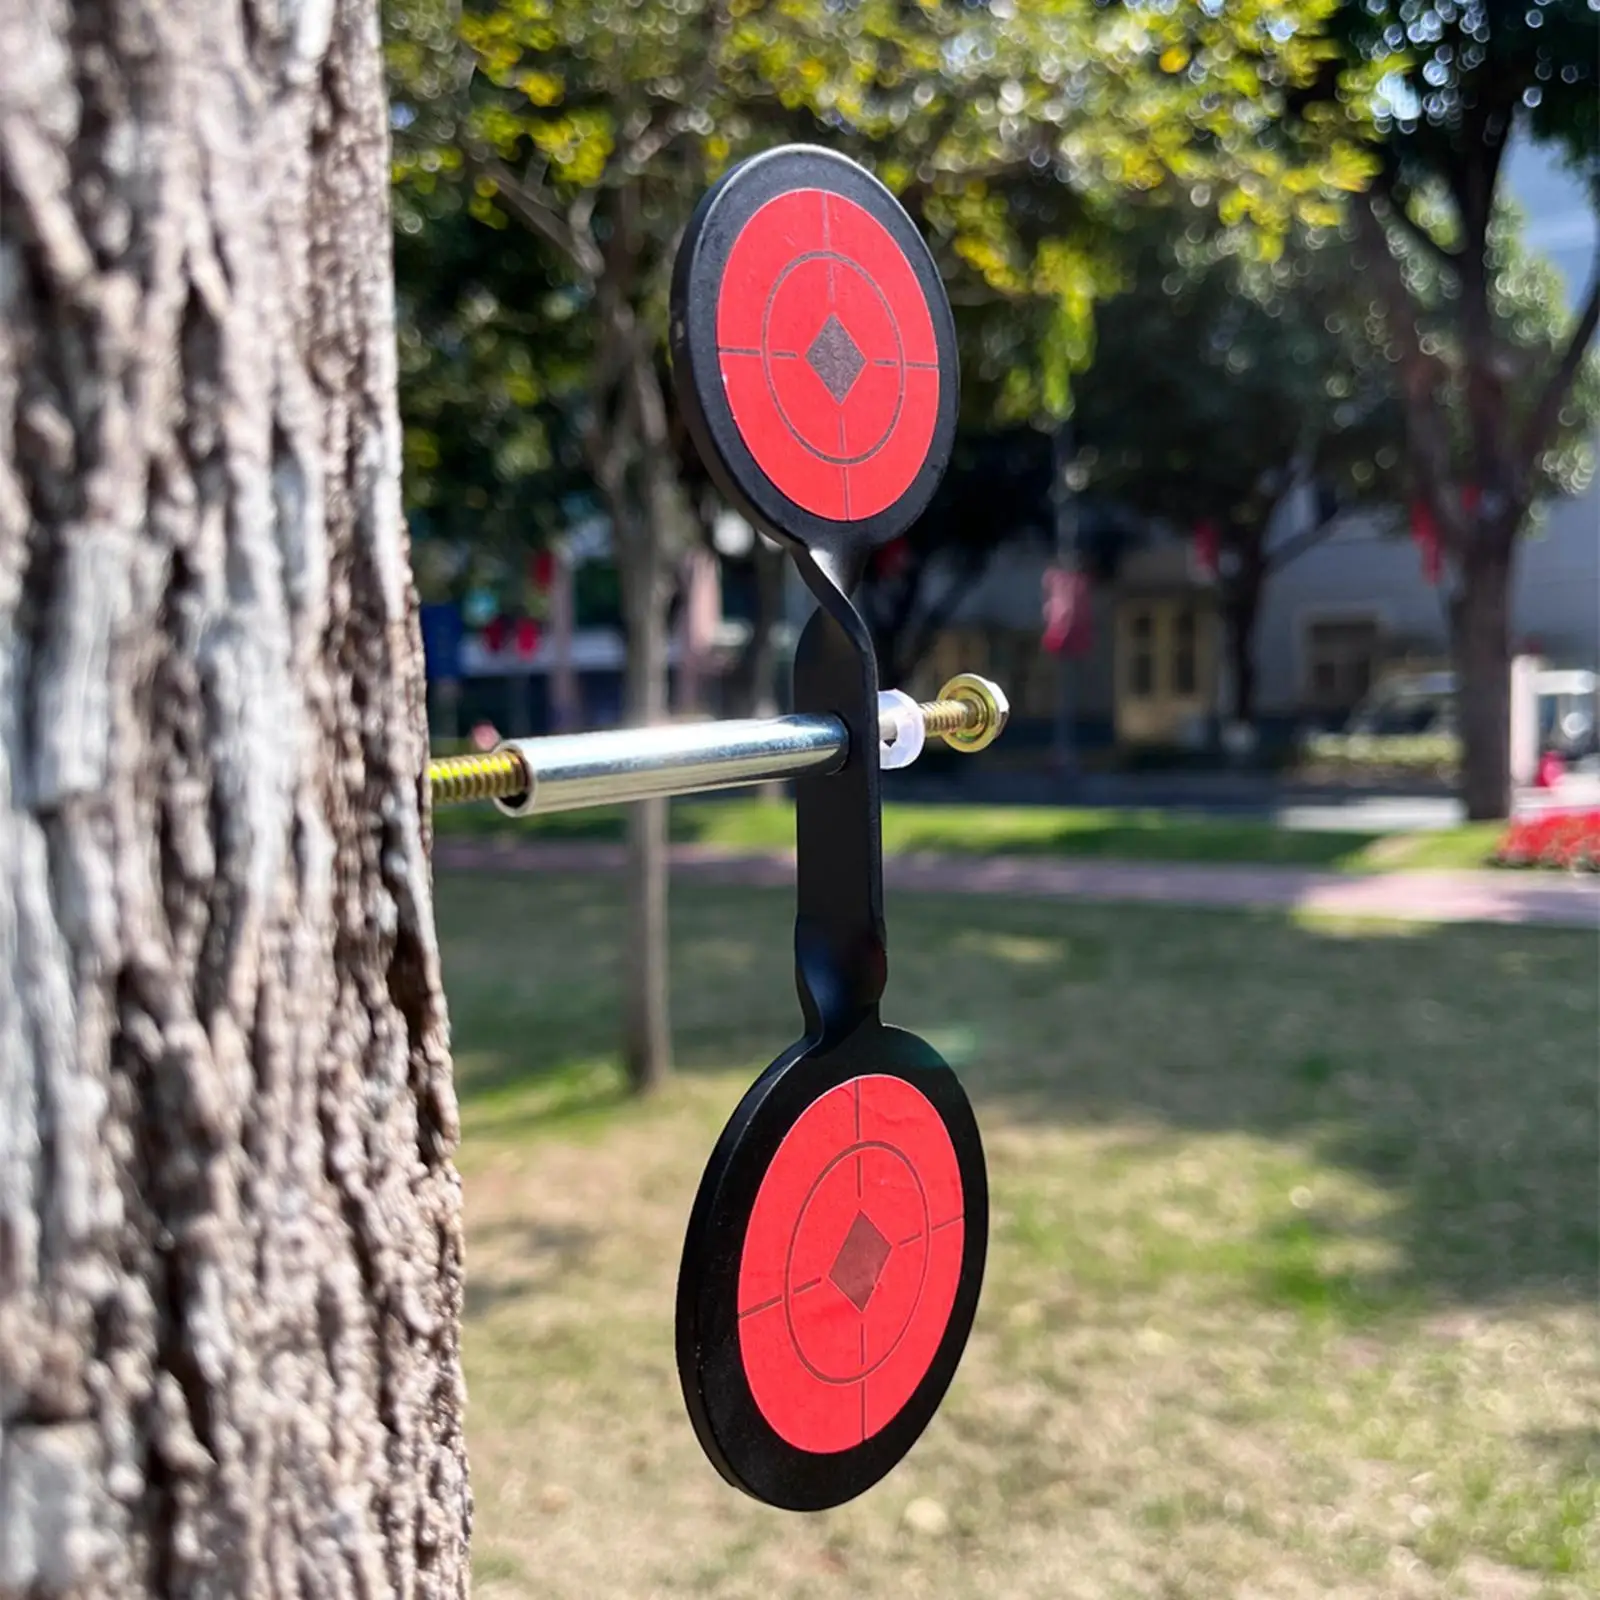 Shooting Target Reset Spinner 360 Degree Rotation Tree Mount Garden Yard Resetting Target for Practice Hunting Outdoor Training